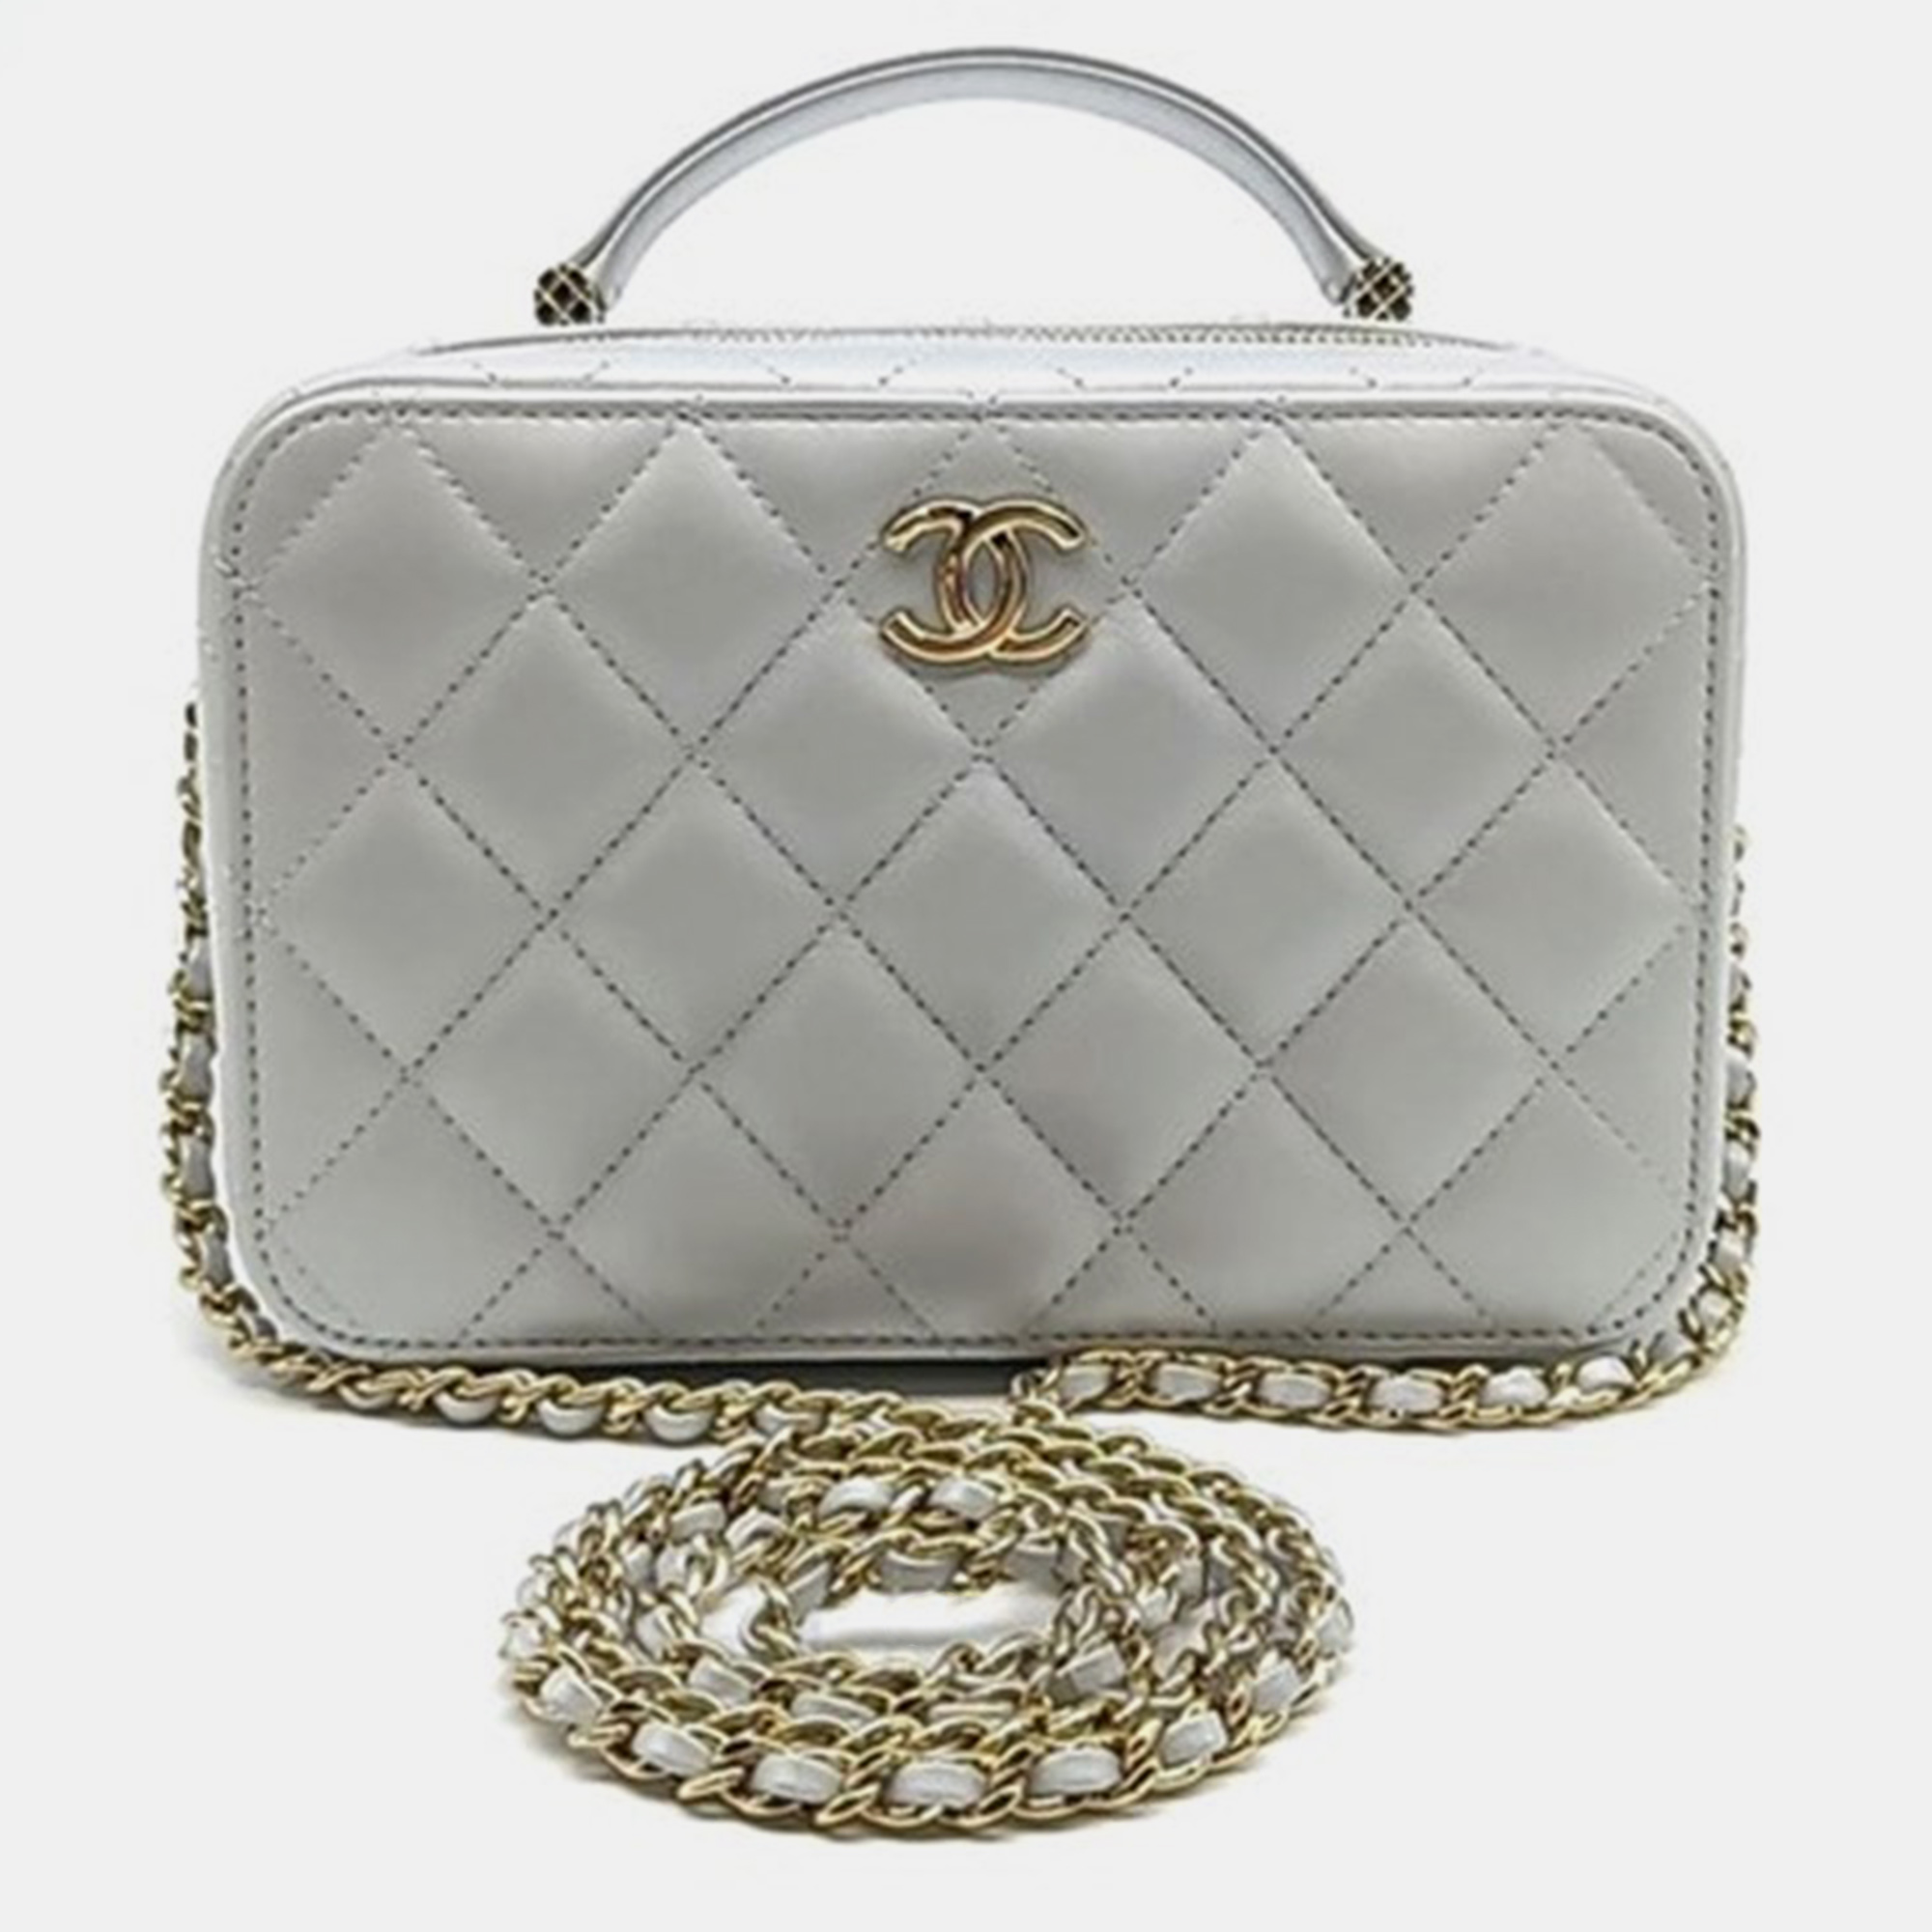 

Chanel Metallic Grey and Champagne Gold Lambskin Leather Vanity Case Bag